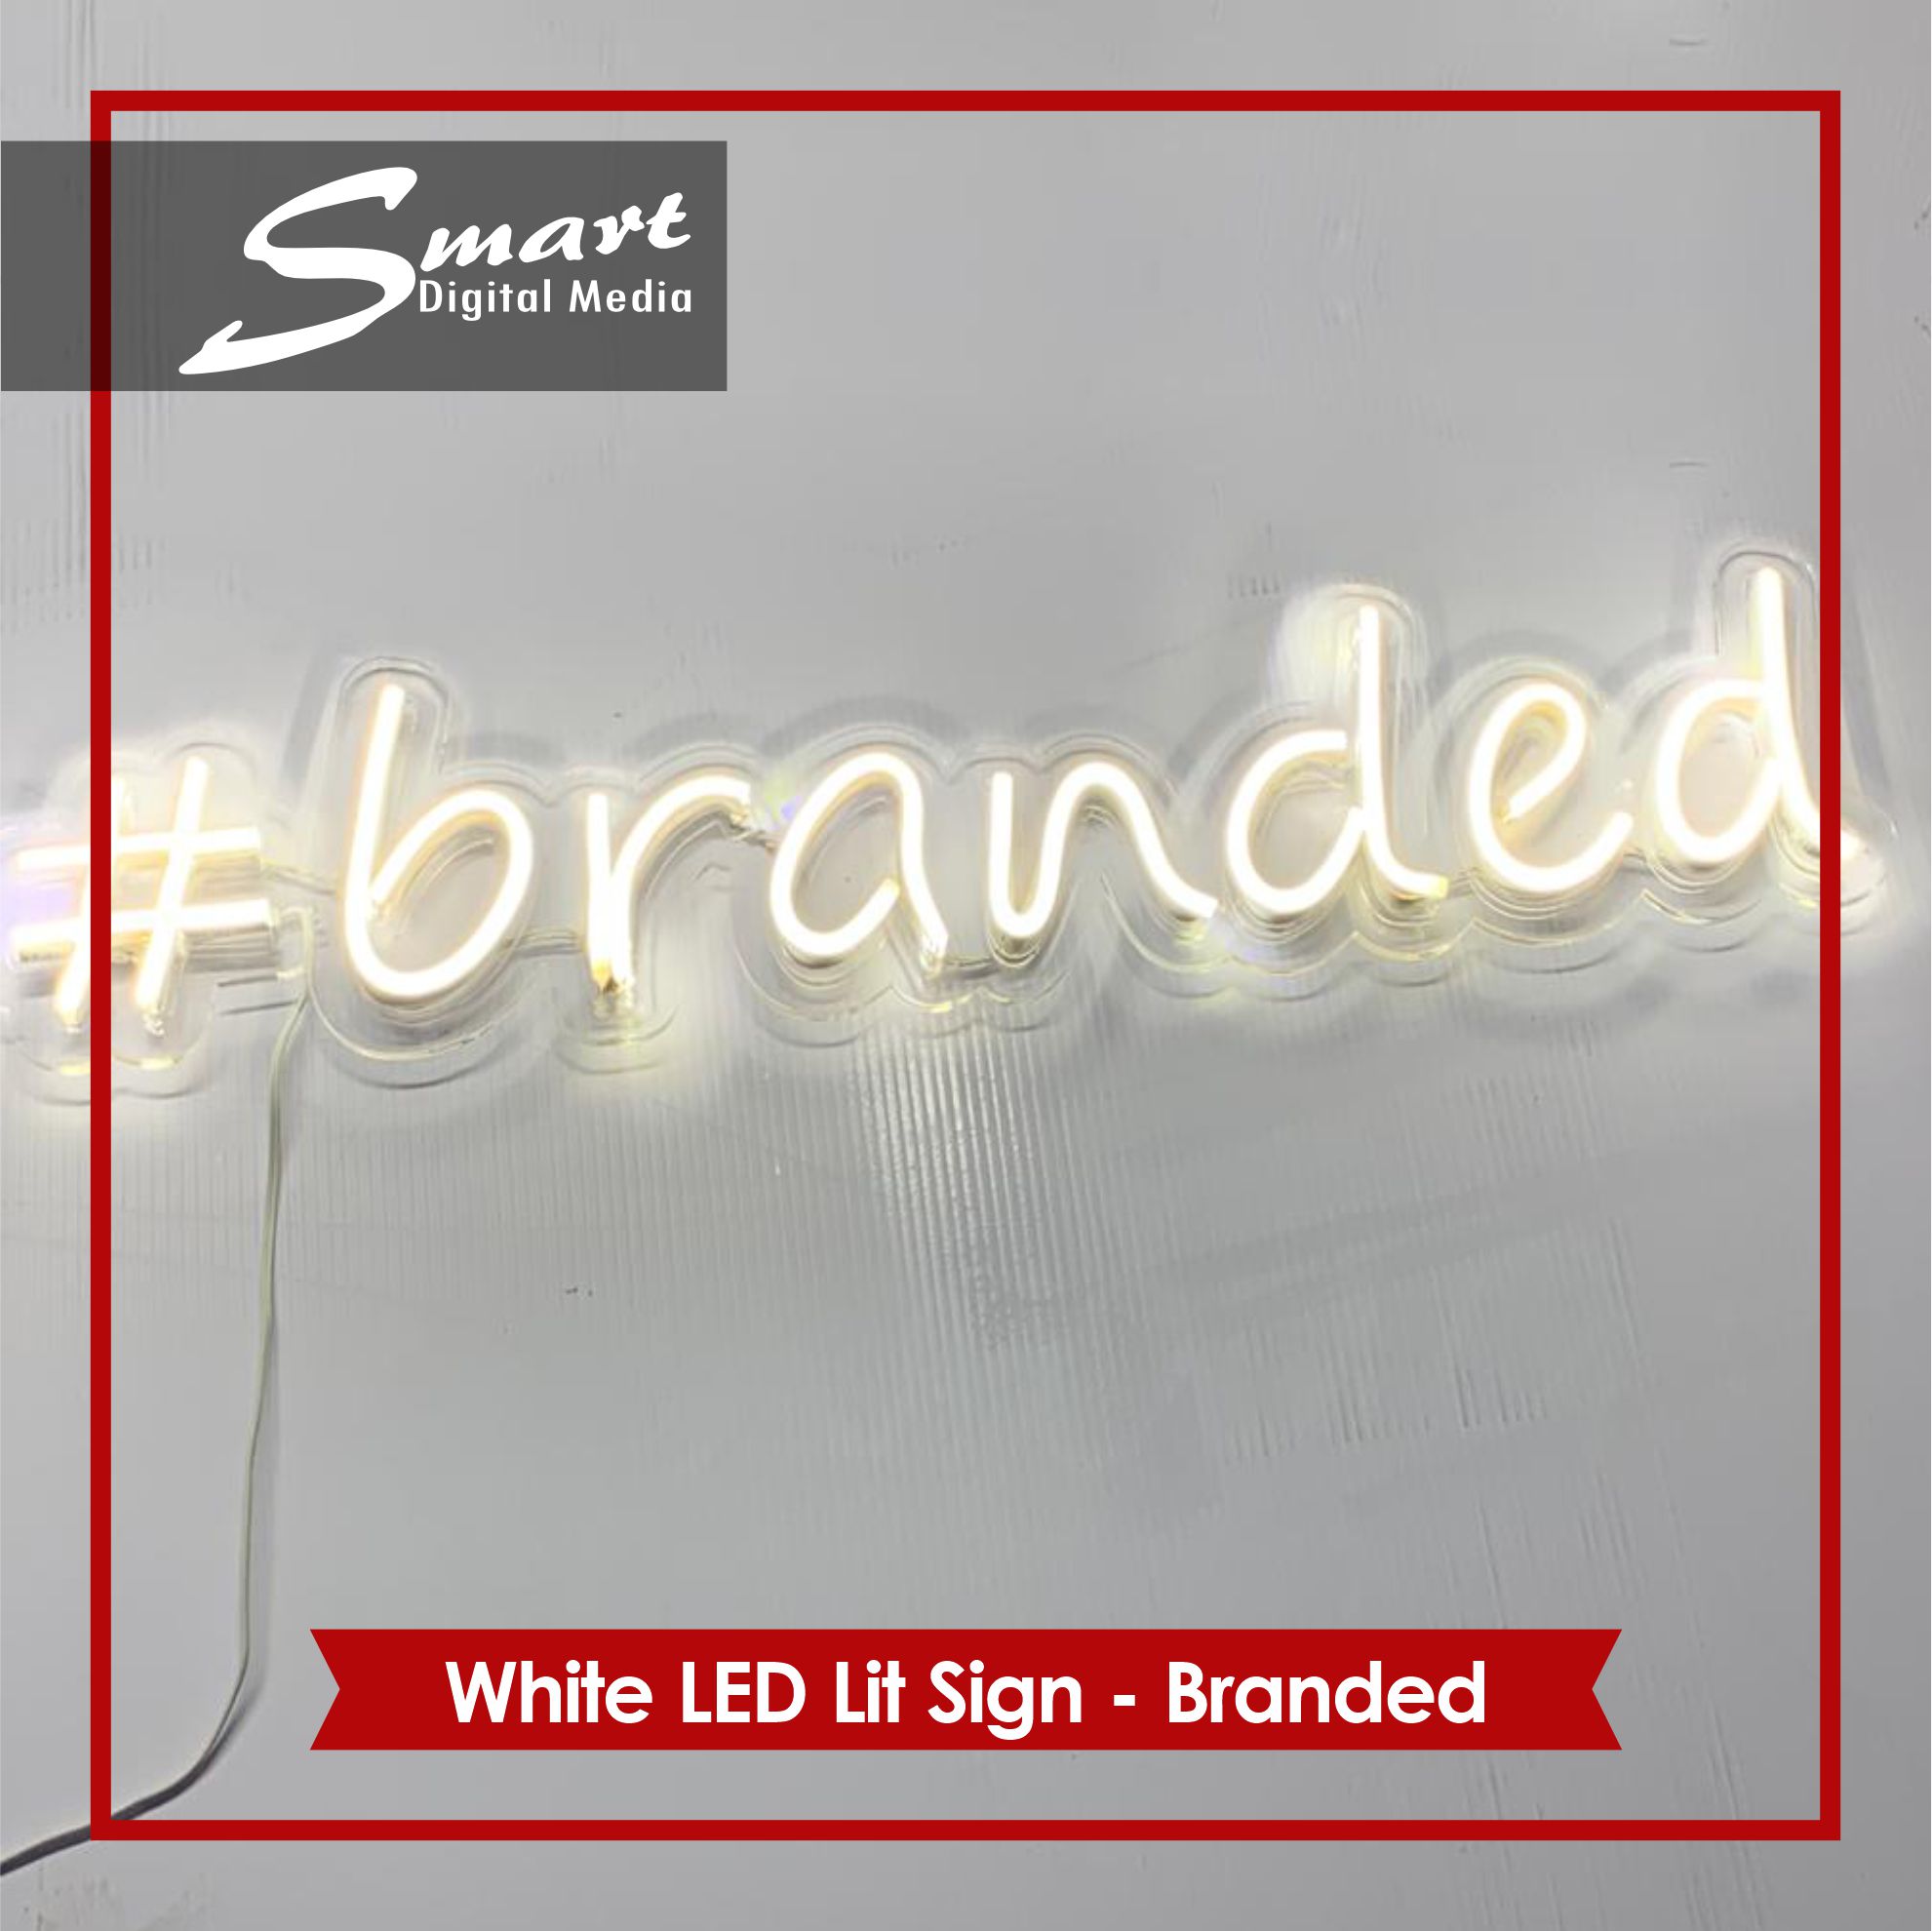 Happy and excited, newlyweds ordered this cool white LED Light and called it "Branded". Smart Digital Media made this from energy-saving and safe neon flex tubing.